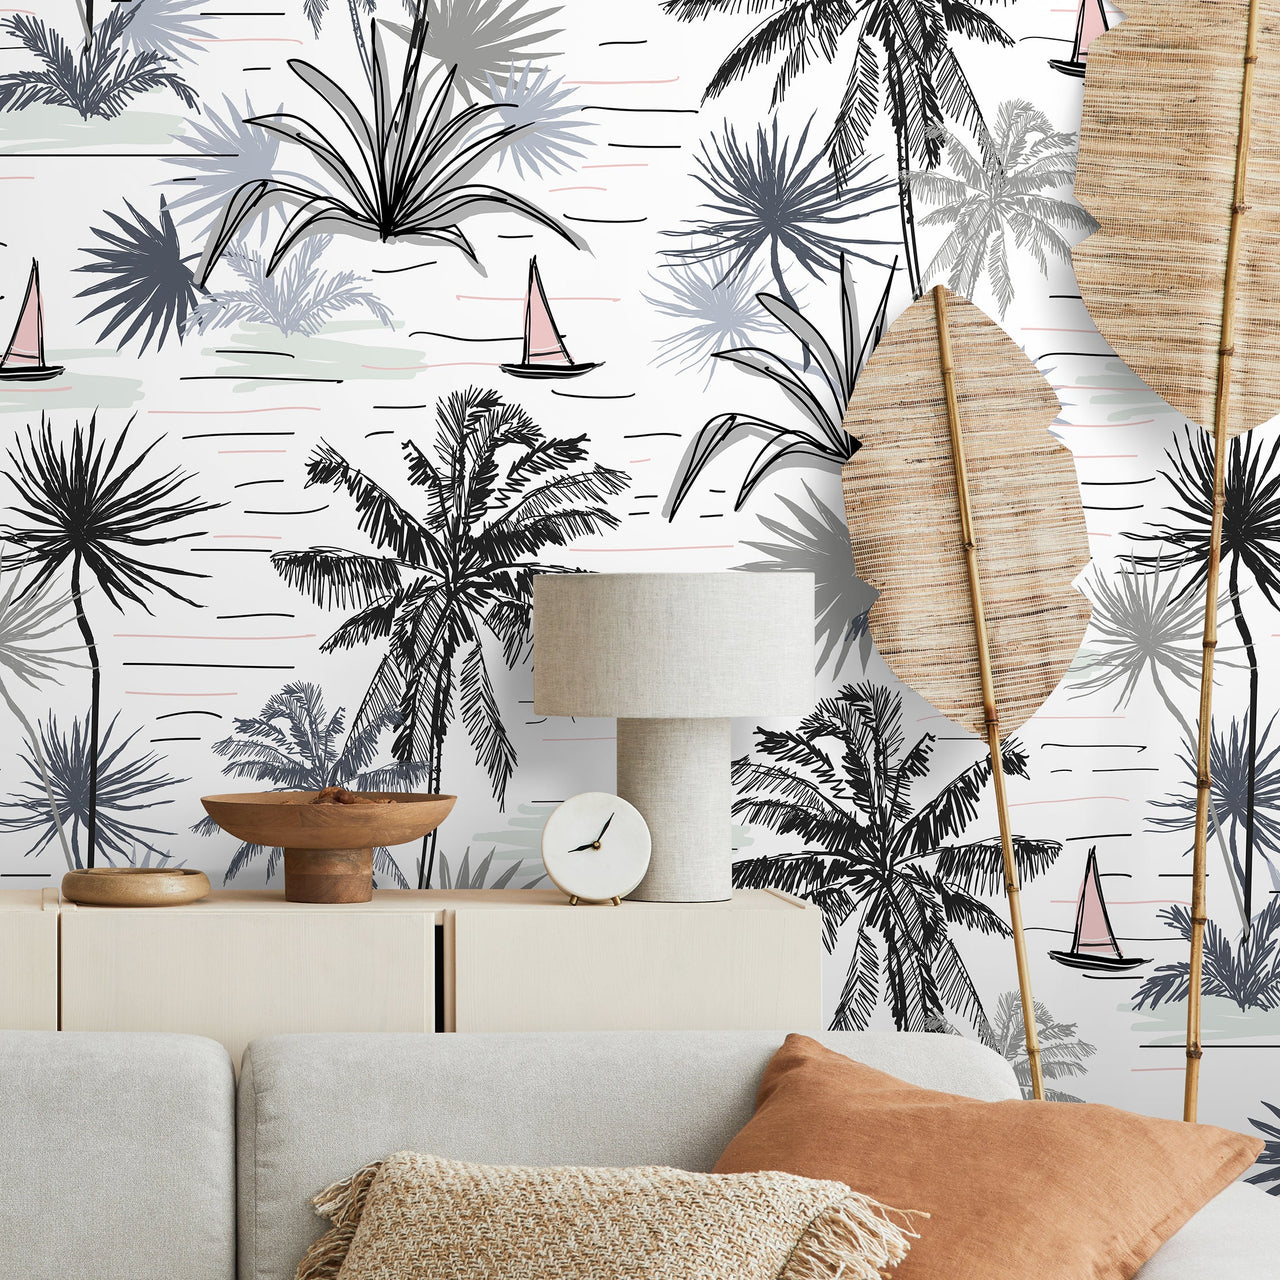 Wallpaper Peel and Stick Wallpaper Removable Wallpaper Home Decor Wall Art Wall Decor Room Decor / Boho Palms and Boat Wallpaper - A792